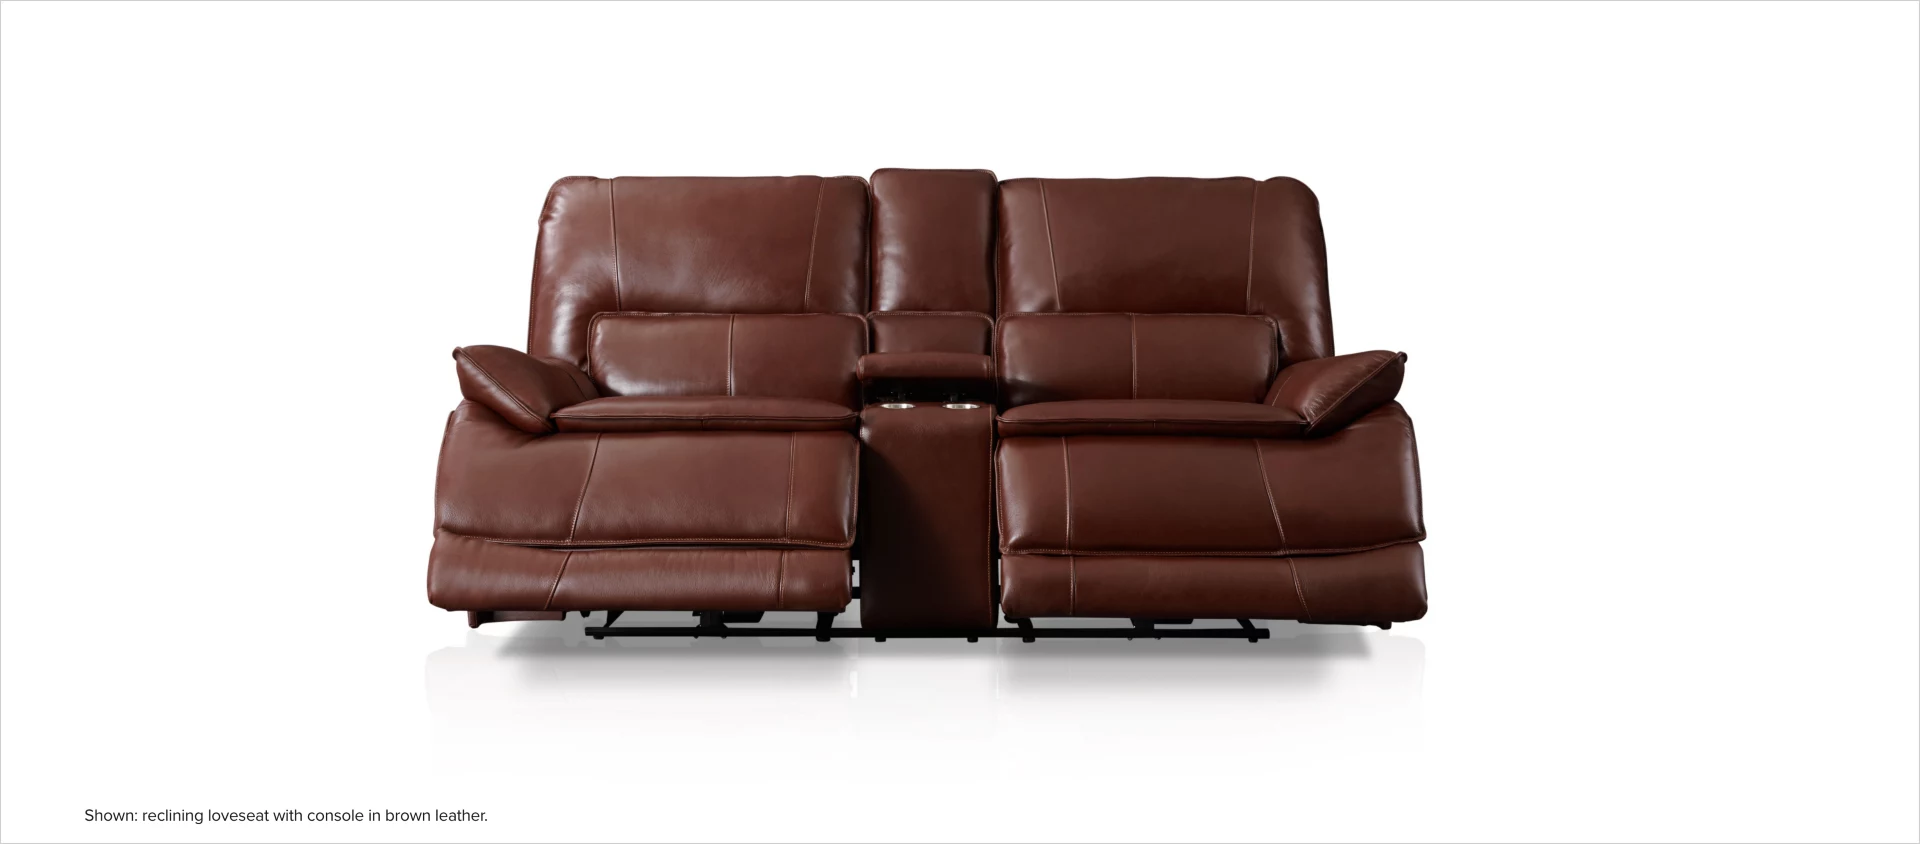 Aston reclining loveseat with console in brown leather.